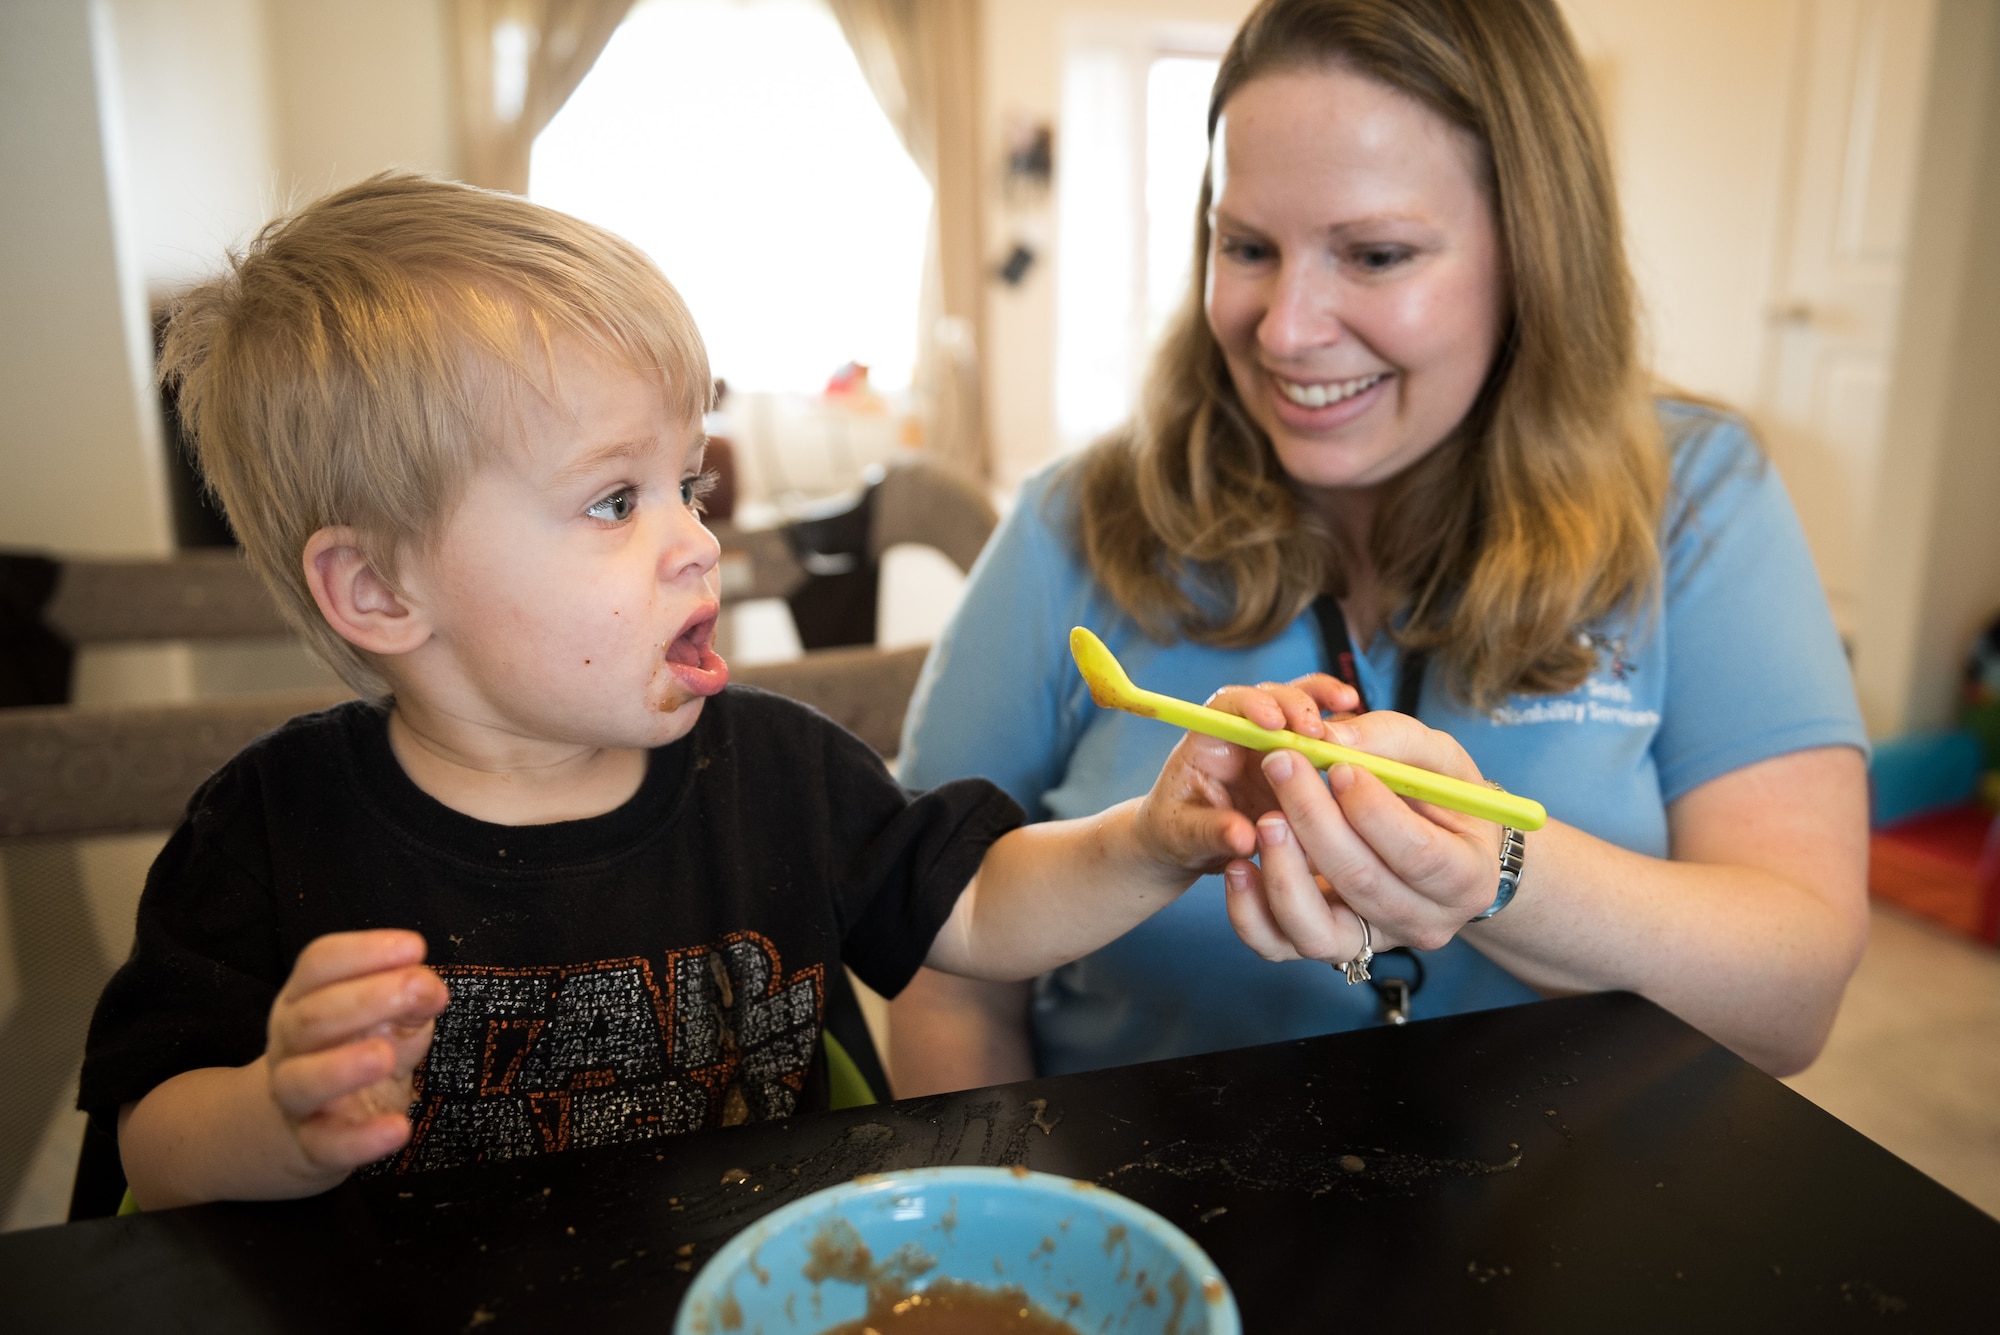 Maj. Amy Hansen, 940th Wing Inspector General and occupational therapist in the private sector teaches one of her clients how to use a spoon at his home on March 25, 2016 at Beale Air Force Base, California. As an occupational therapist, Hansen helps people with various disabilities live a more fulfilling life by teaching them how to do things that will help them be more self-sufficient. (U.S. Air Force Photo/ Staff Sgt. Brenda Davis)